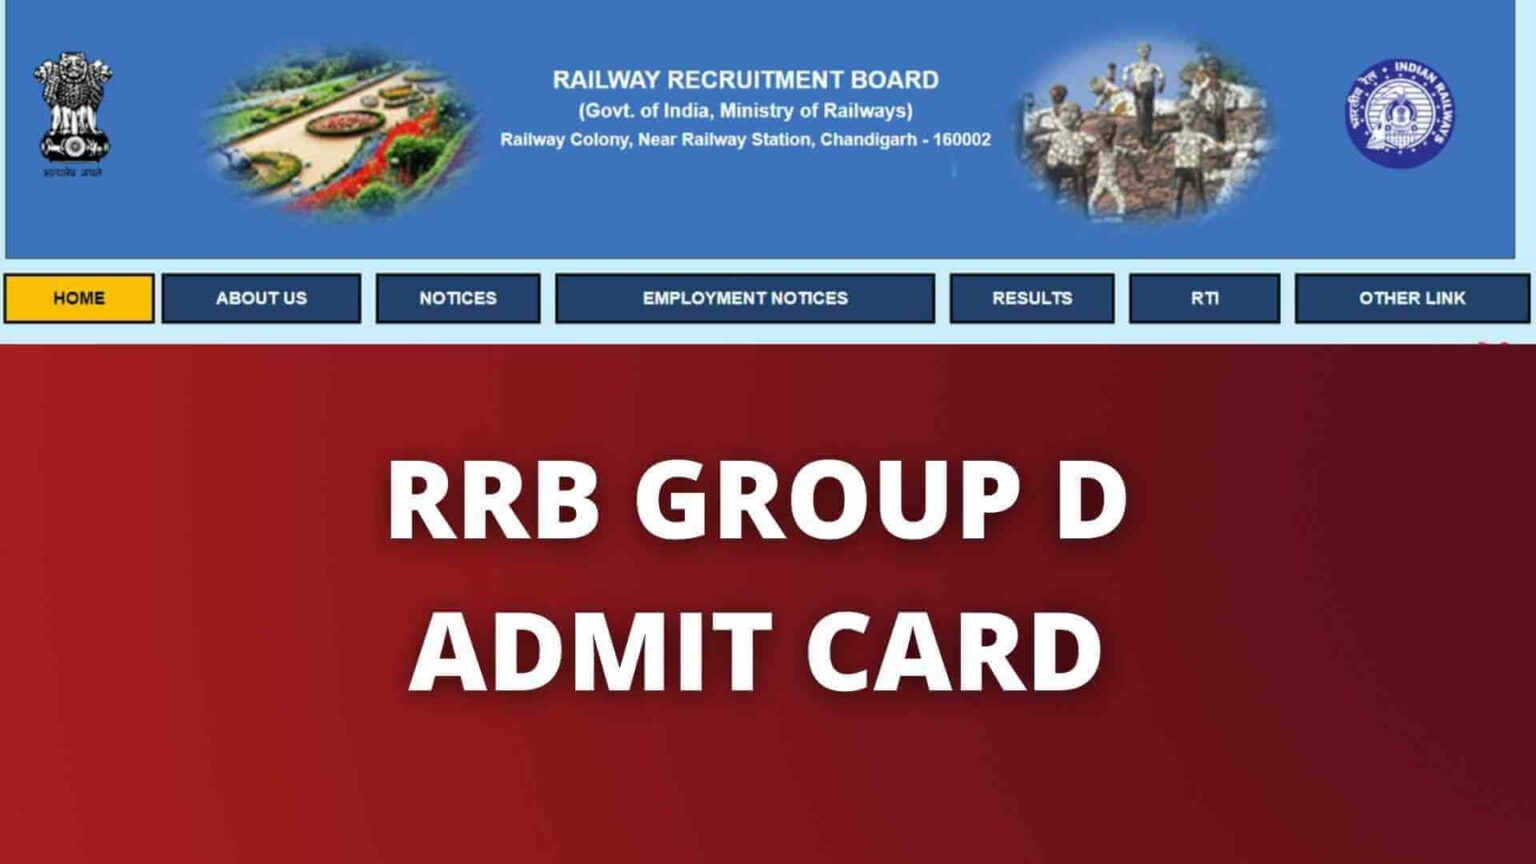 rrb-group-d-admit-card-2022-region-wise-phase-1-hall-ticket